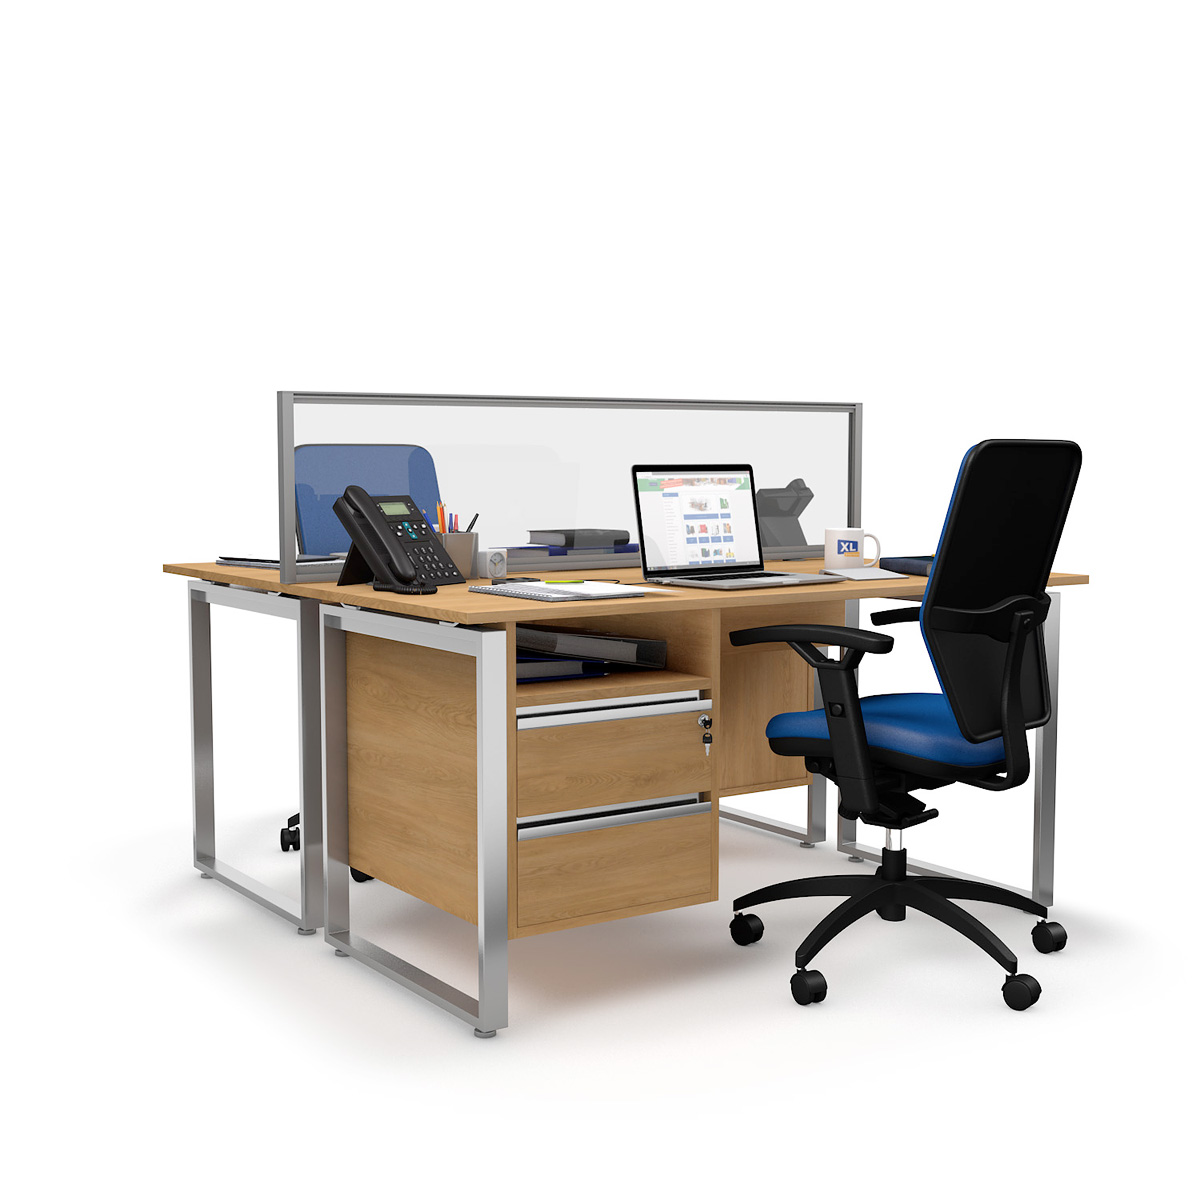 FRONTIER® Glazed Office Screen Desk Dividers - 380mm High Clear Perspex Screen 